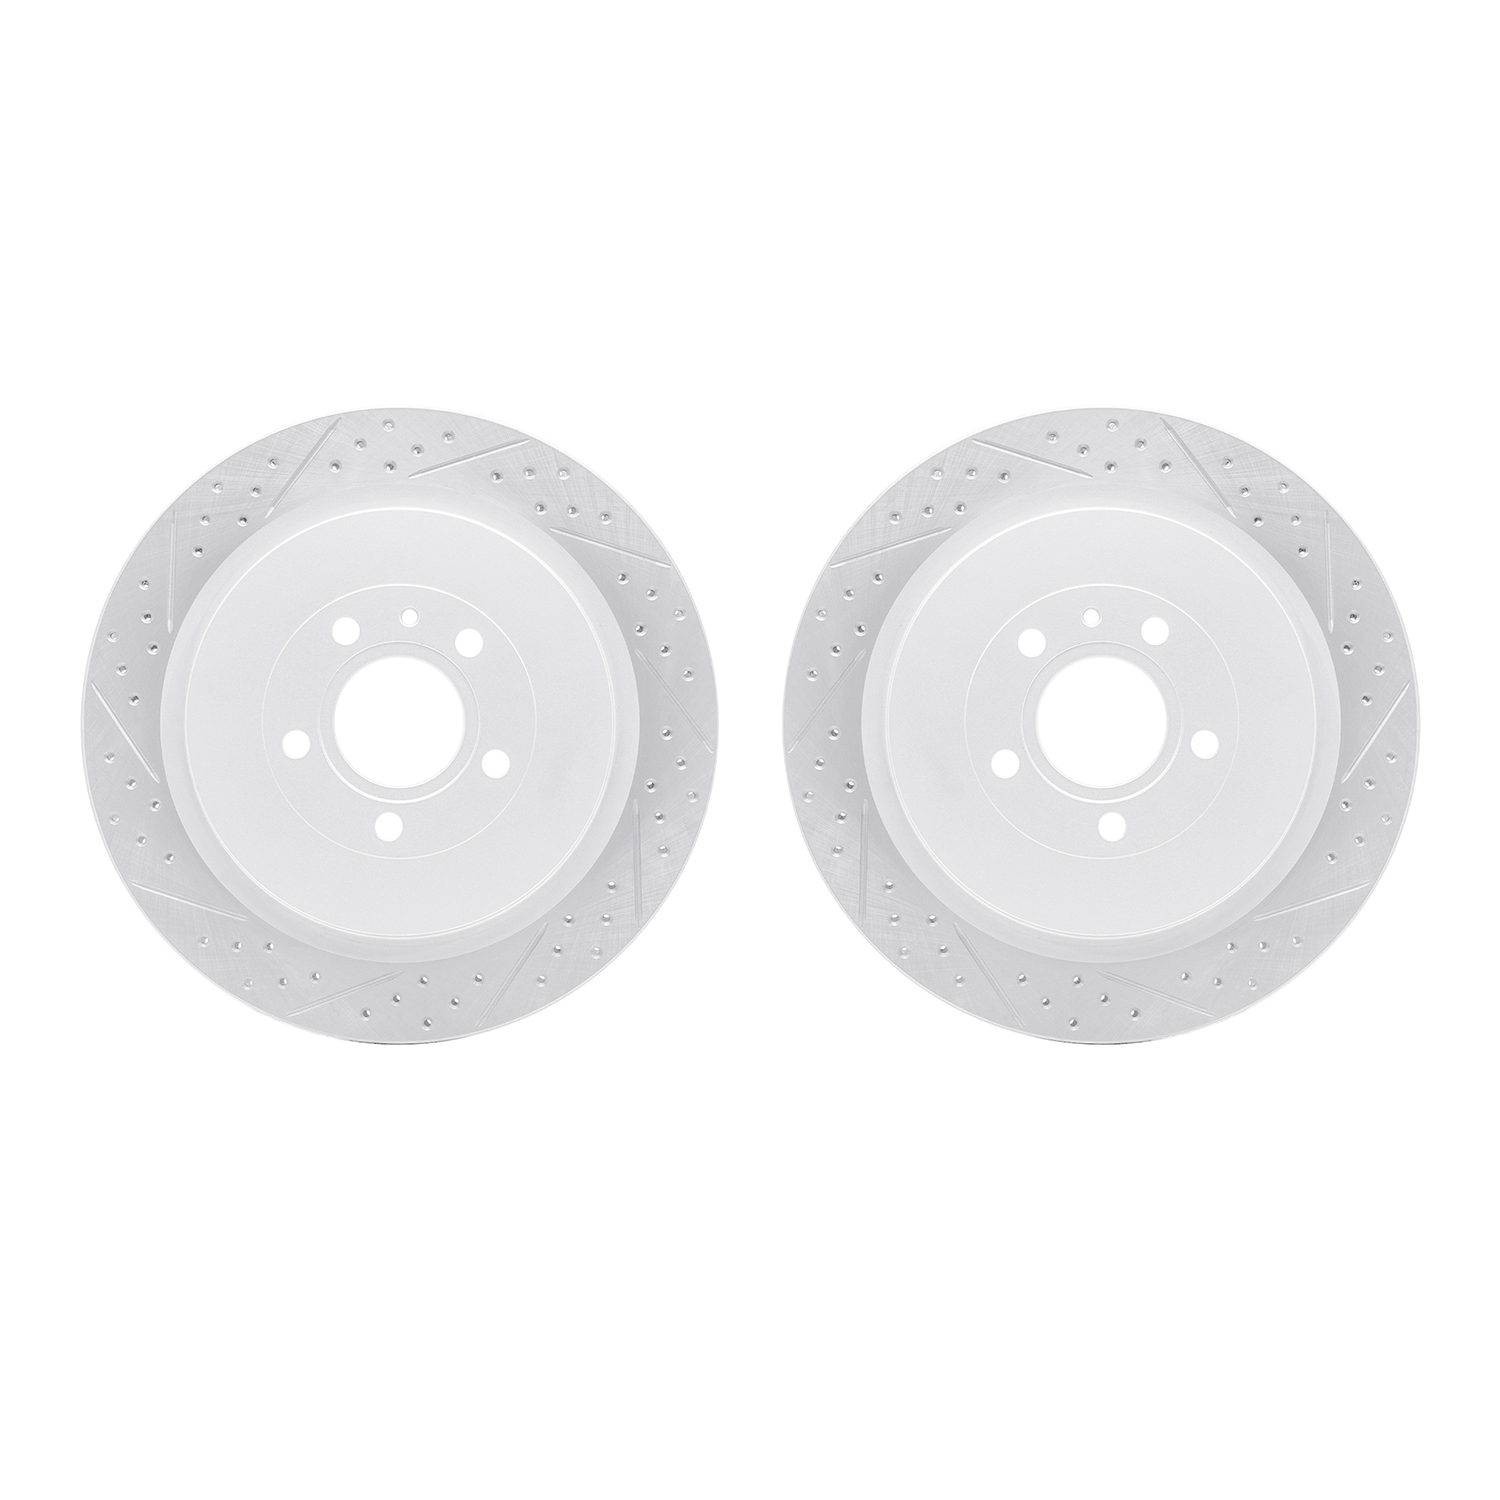 2002-54168 Geoperformance Drilled/Slotted Brake Rotors, 2013-2014 Ford/Lincoln/Mercury/Mazda, Position: Rear